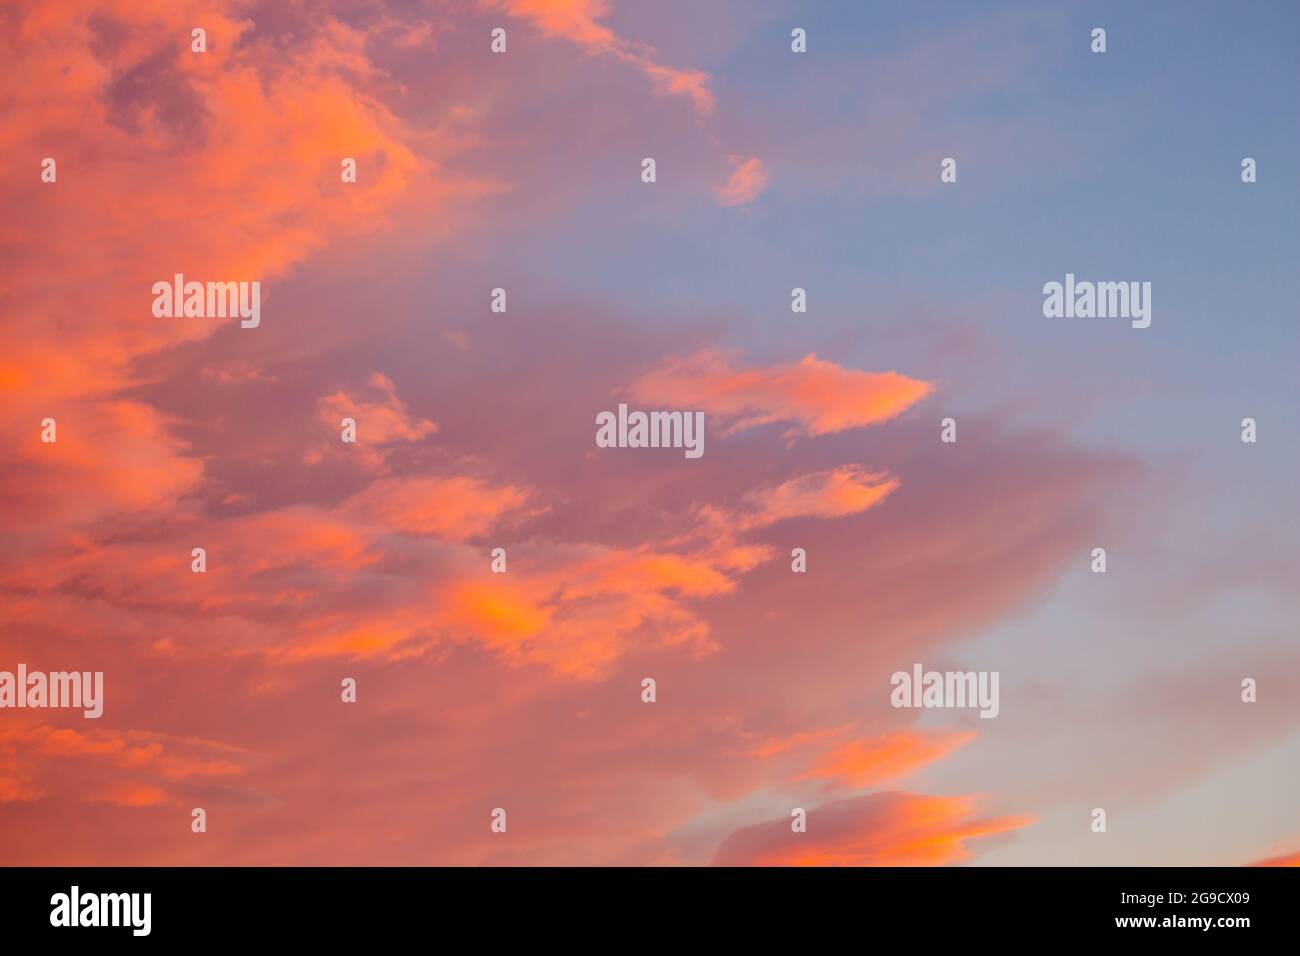 Colorful, fluffy, abstract nature like, clouds in summer, horizontal Stock Photo